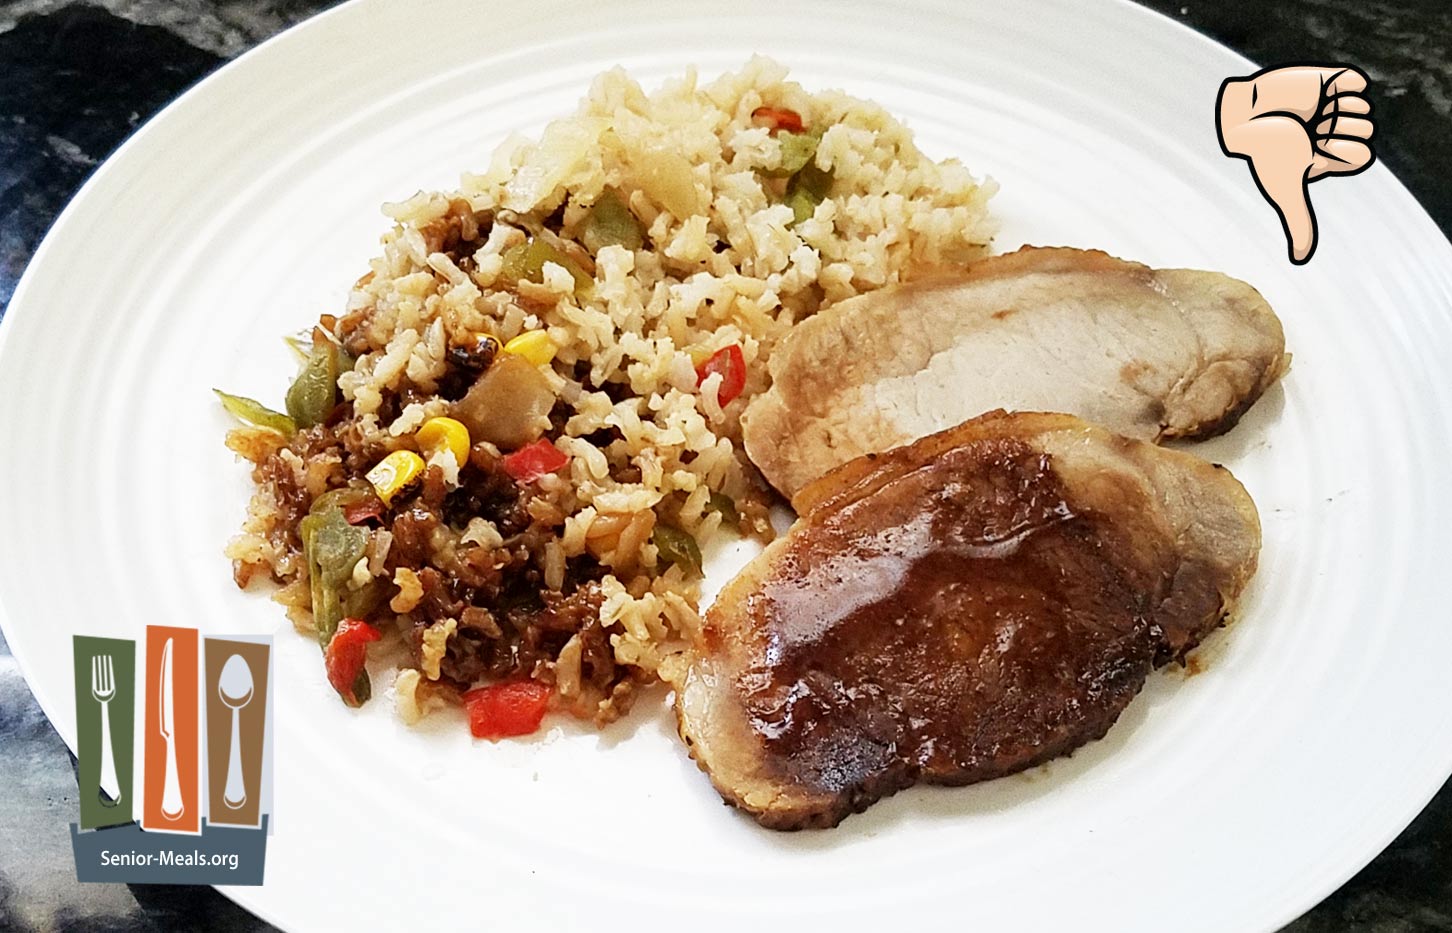 MK Signature Meal - Roasted Pork with Hickory Barbecue Sauce over Southwestern Style Rice and Mixed Vegetables - $12